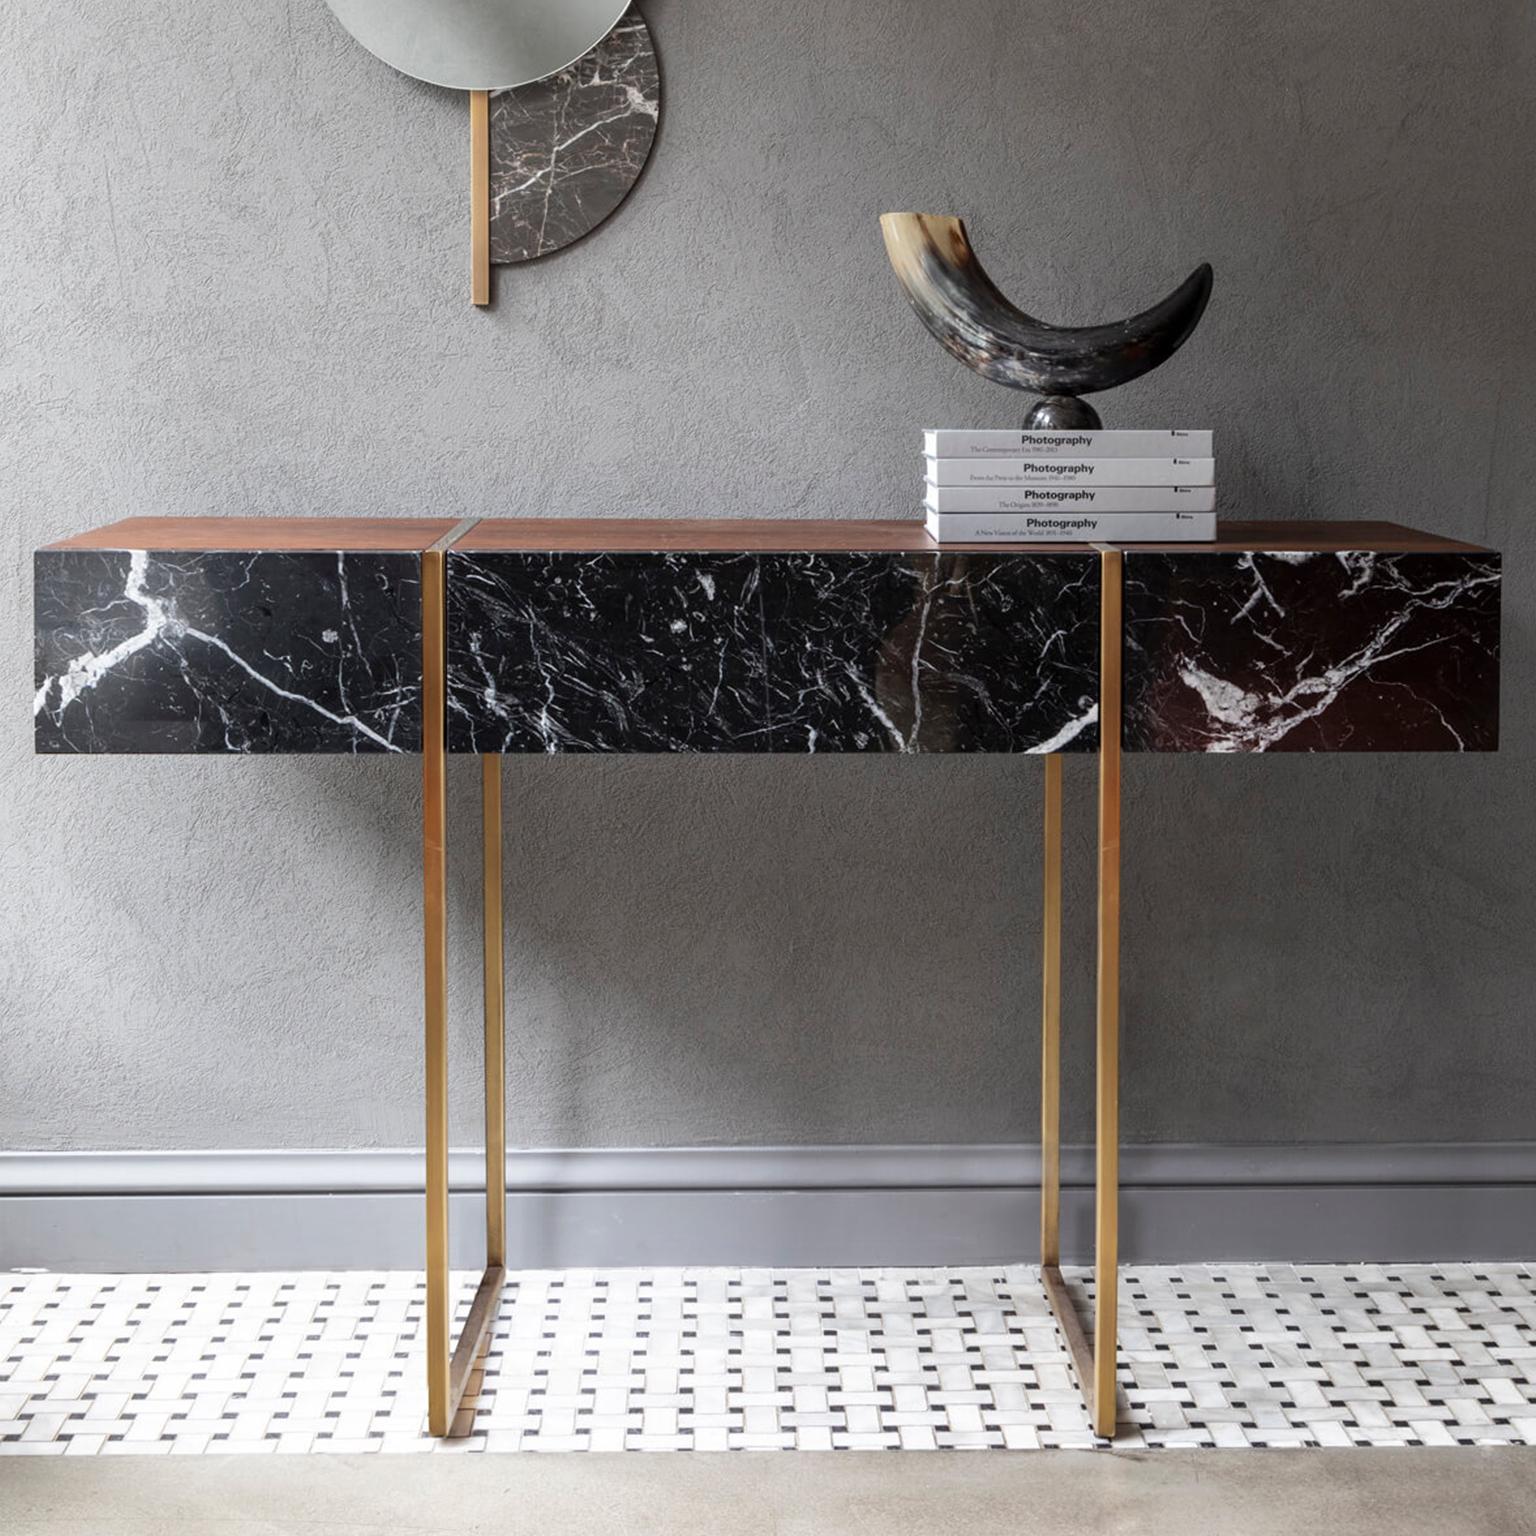 Famed Marble Detailed Sideboard by Lagu.
Designed by Ufuk Ceylan.
Dimensions: W 144 x D 45 x H 90 cm.
Materials: Marble, Metal, Oak.

The famed sideboard is encased in Alexander Black marble highlighted with brass accents, incorporating a